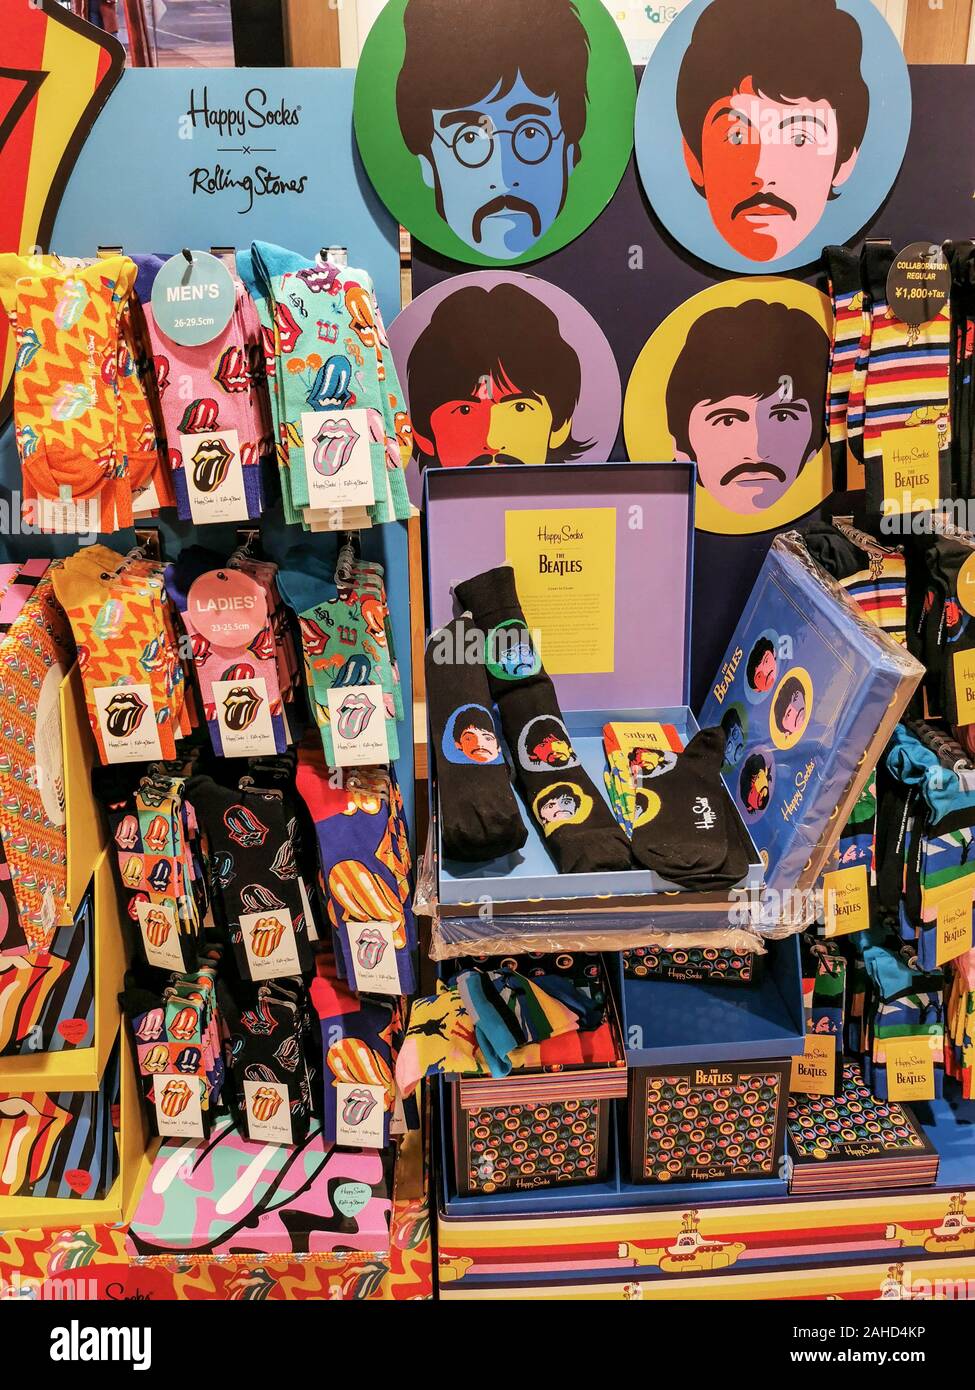 BEATLES AND ROLLING STONES SOCKS,TOWER RECORDS TOKYO Stock Photo - Alamy